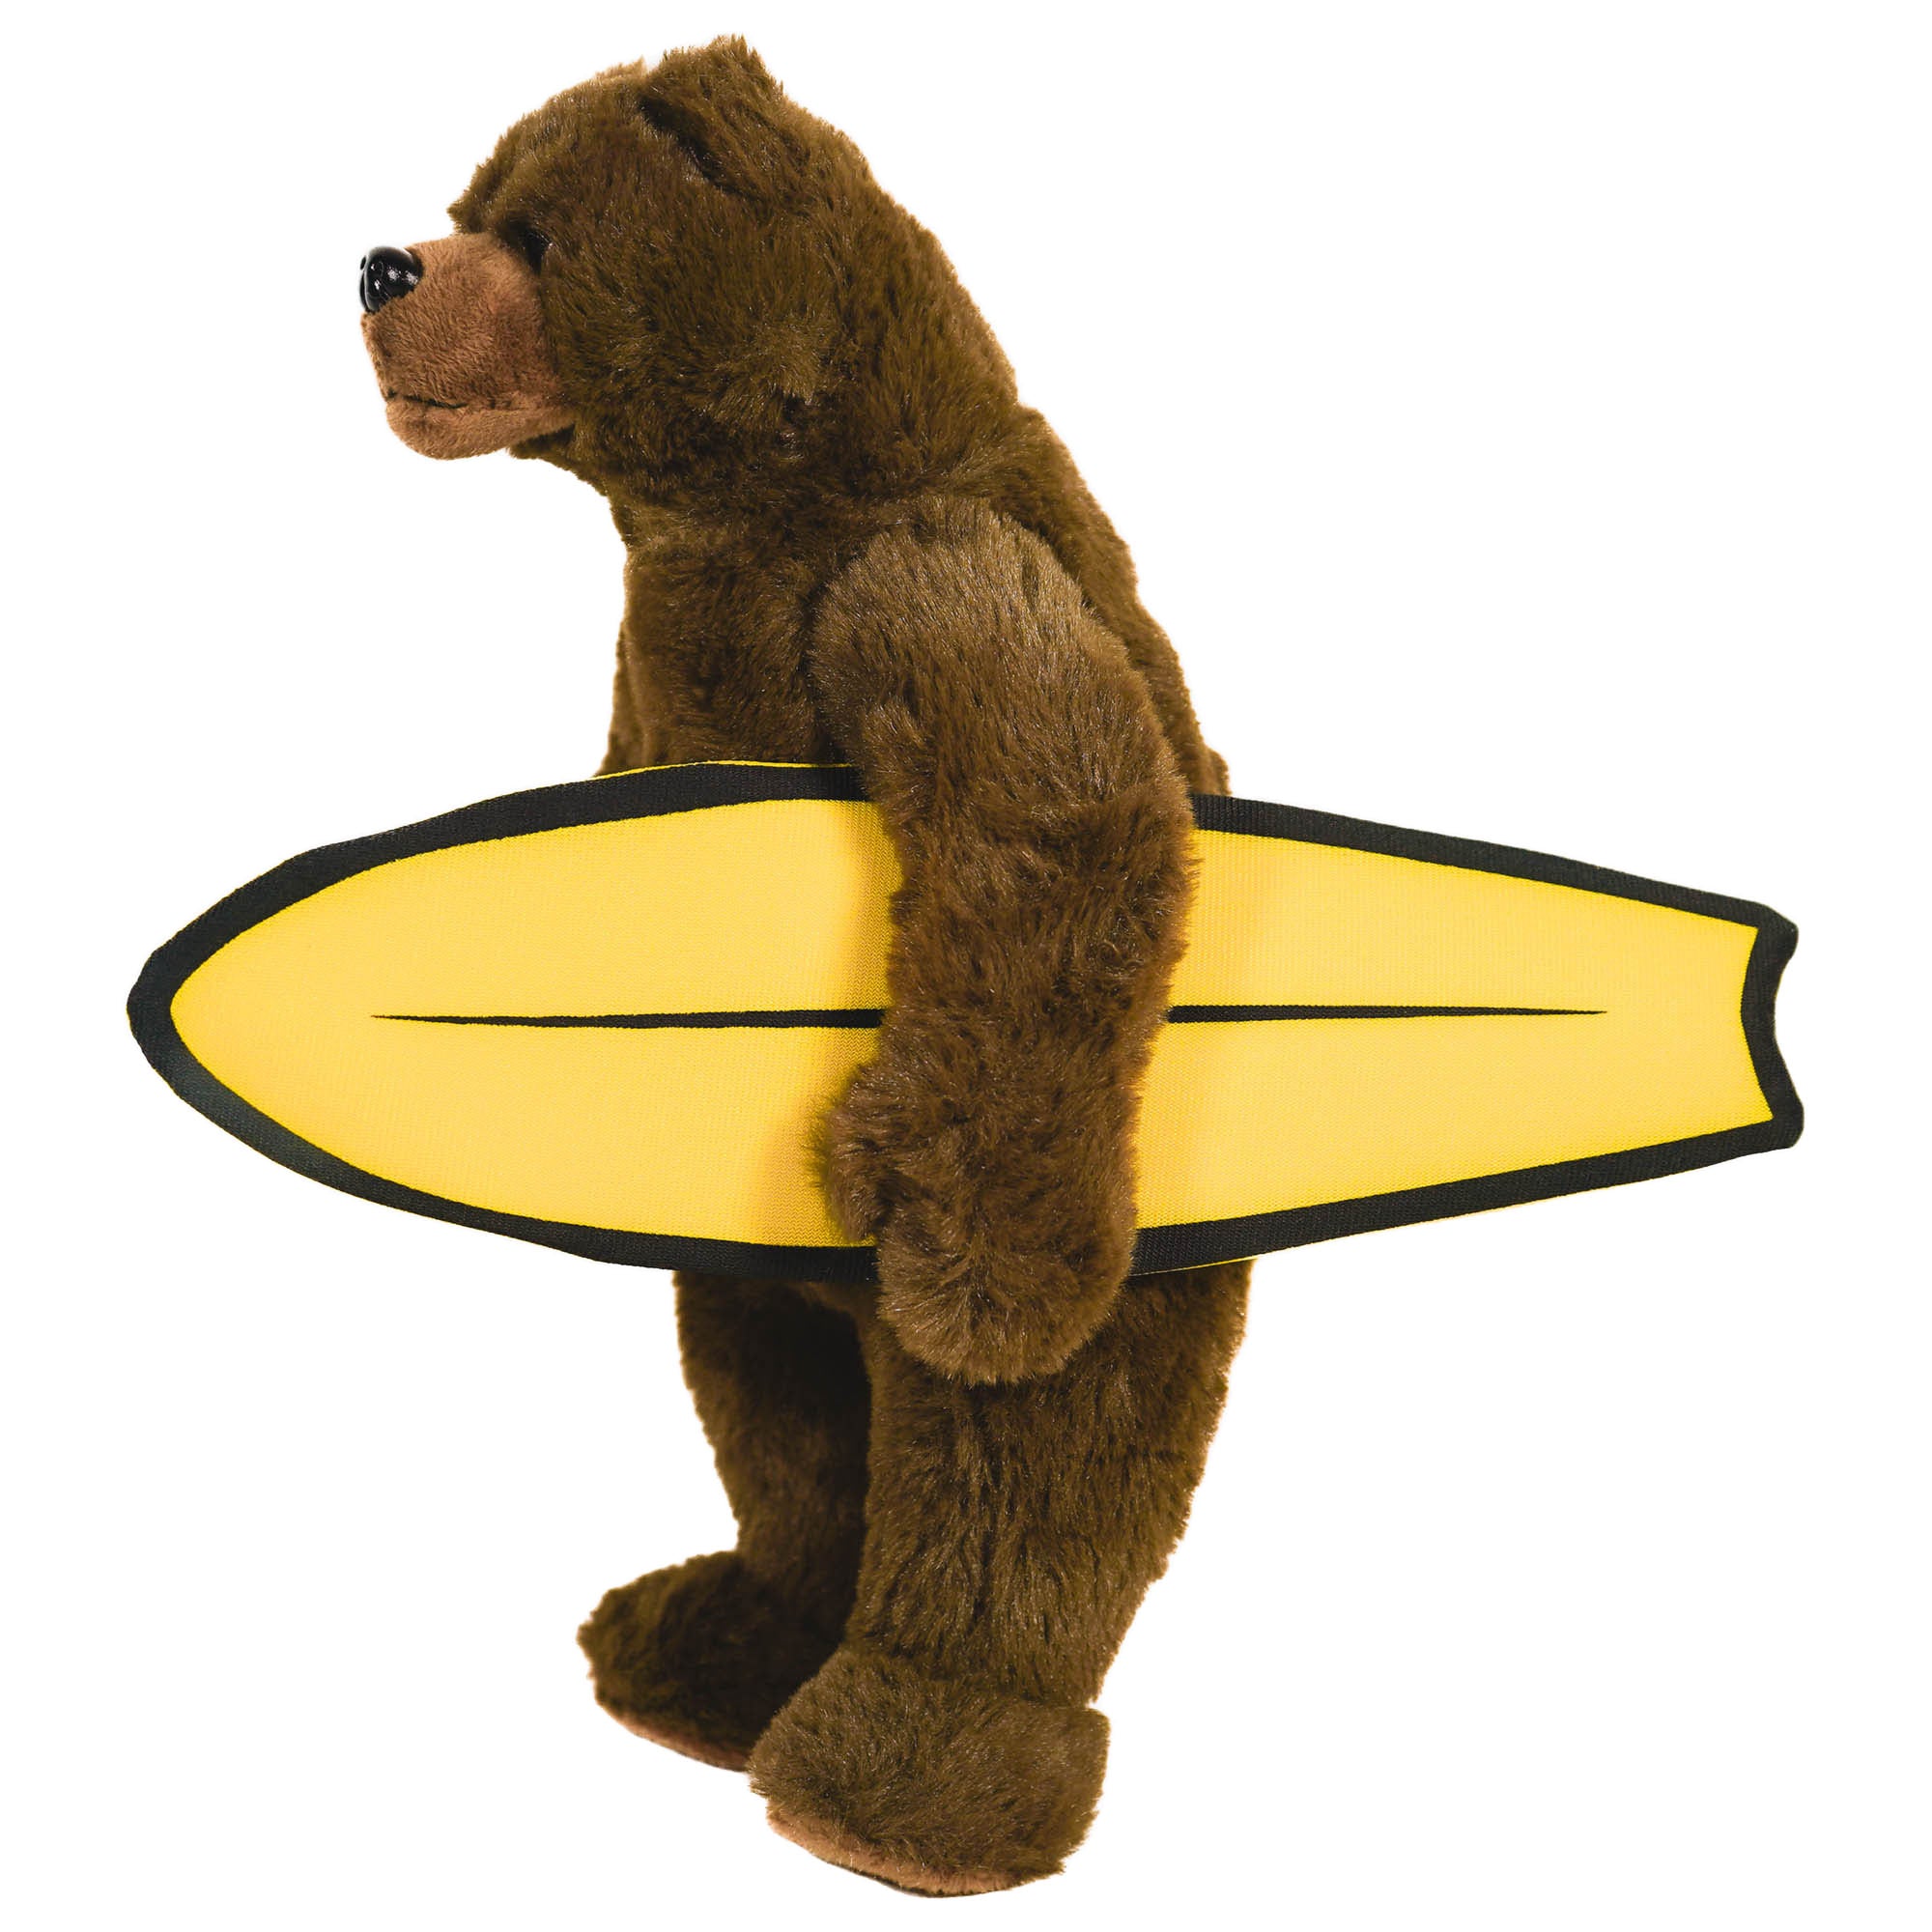 Plush Grizzly - Grizzly bear conservation and protection